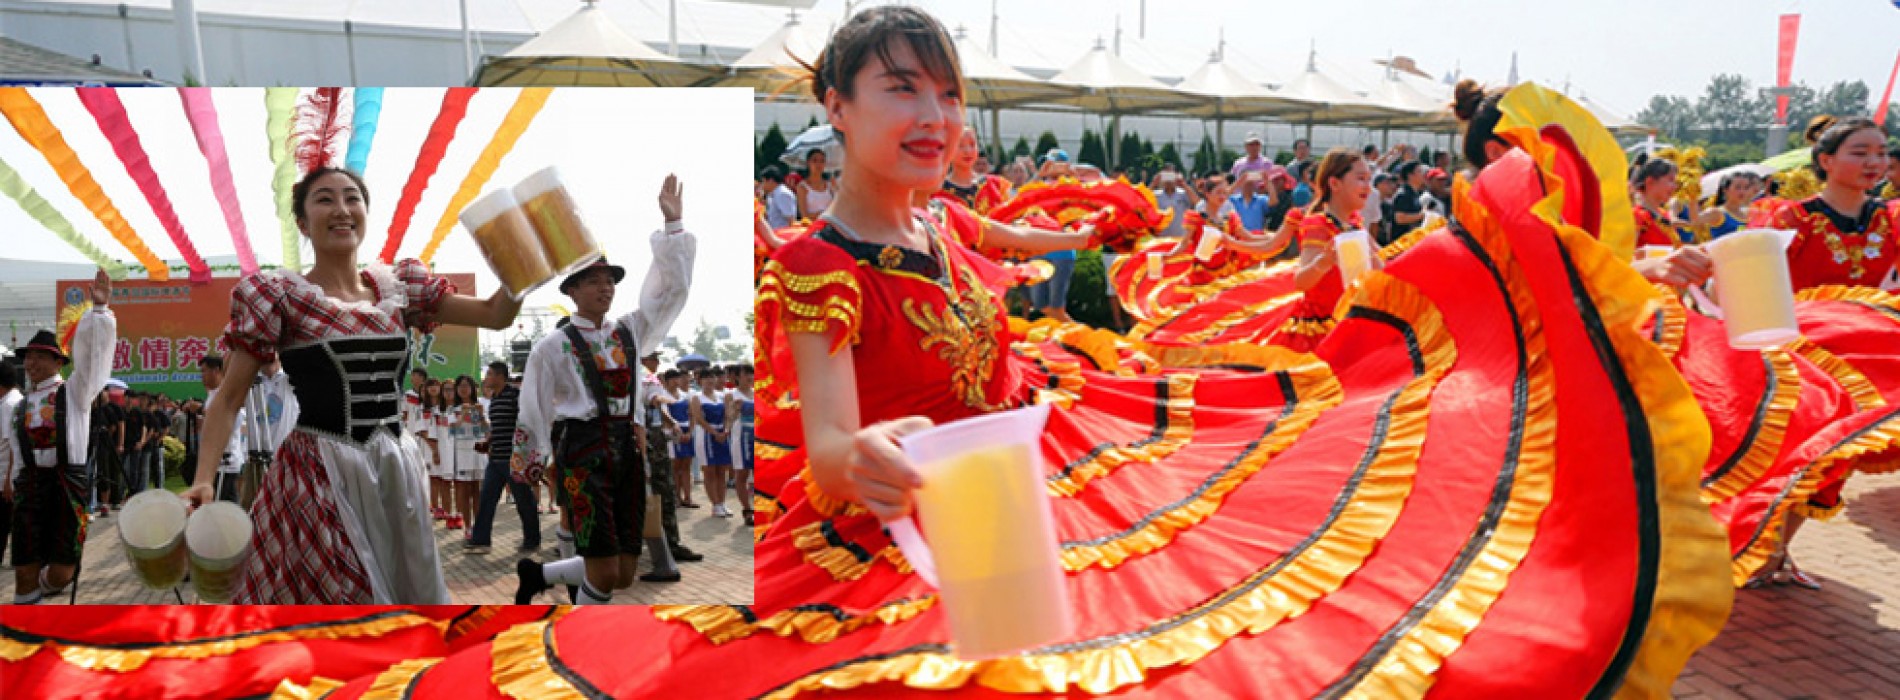 Asia’s Oktoberfest is here – the 27th Qingdao International Beer Festival in Shandong